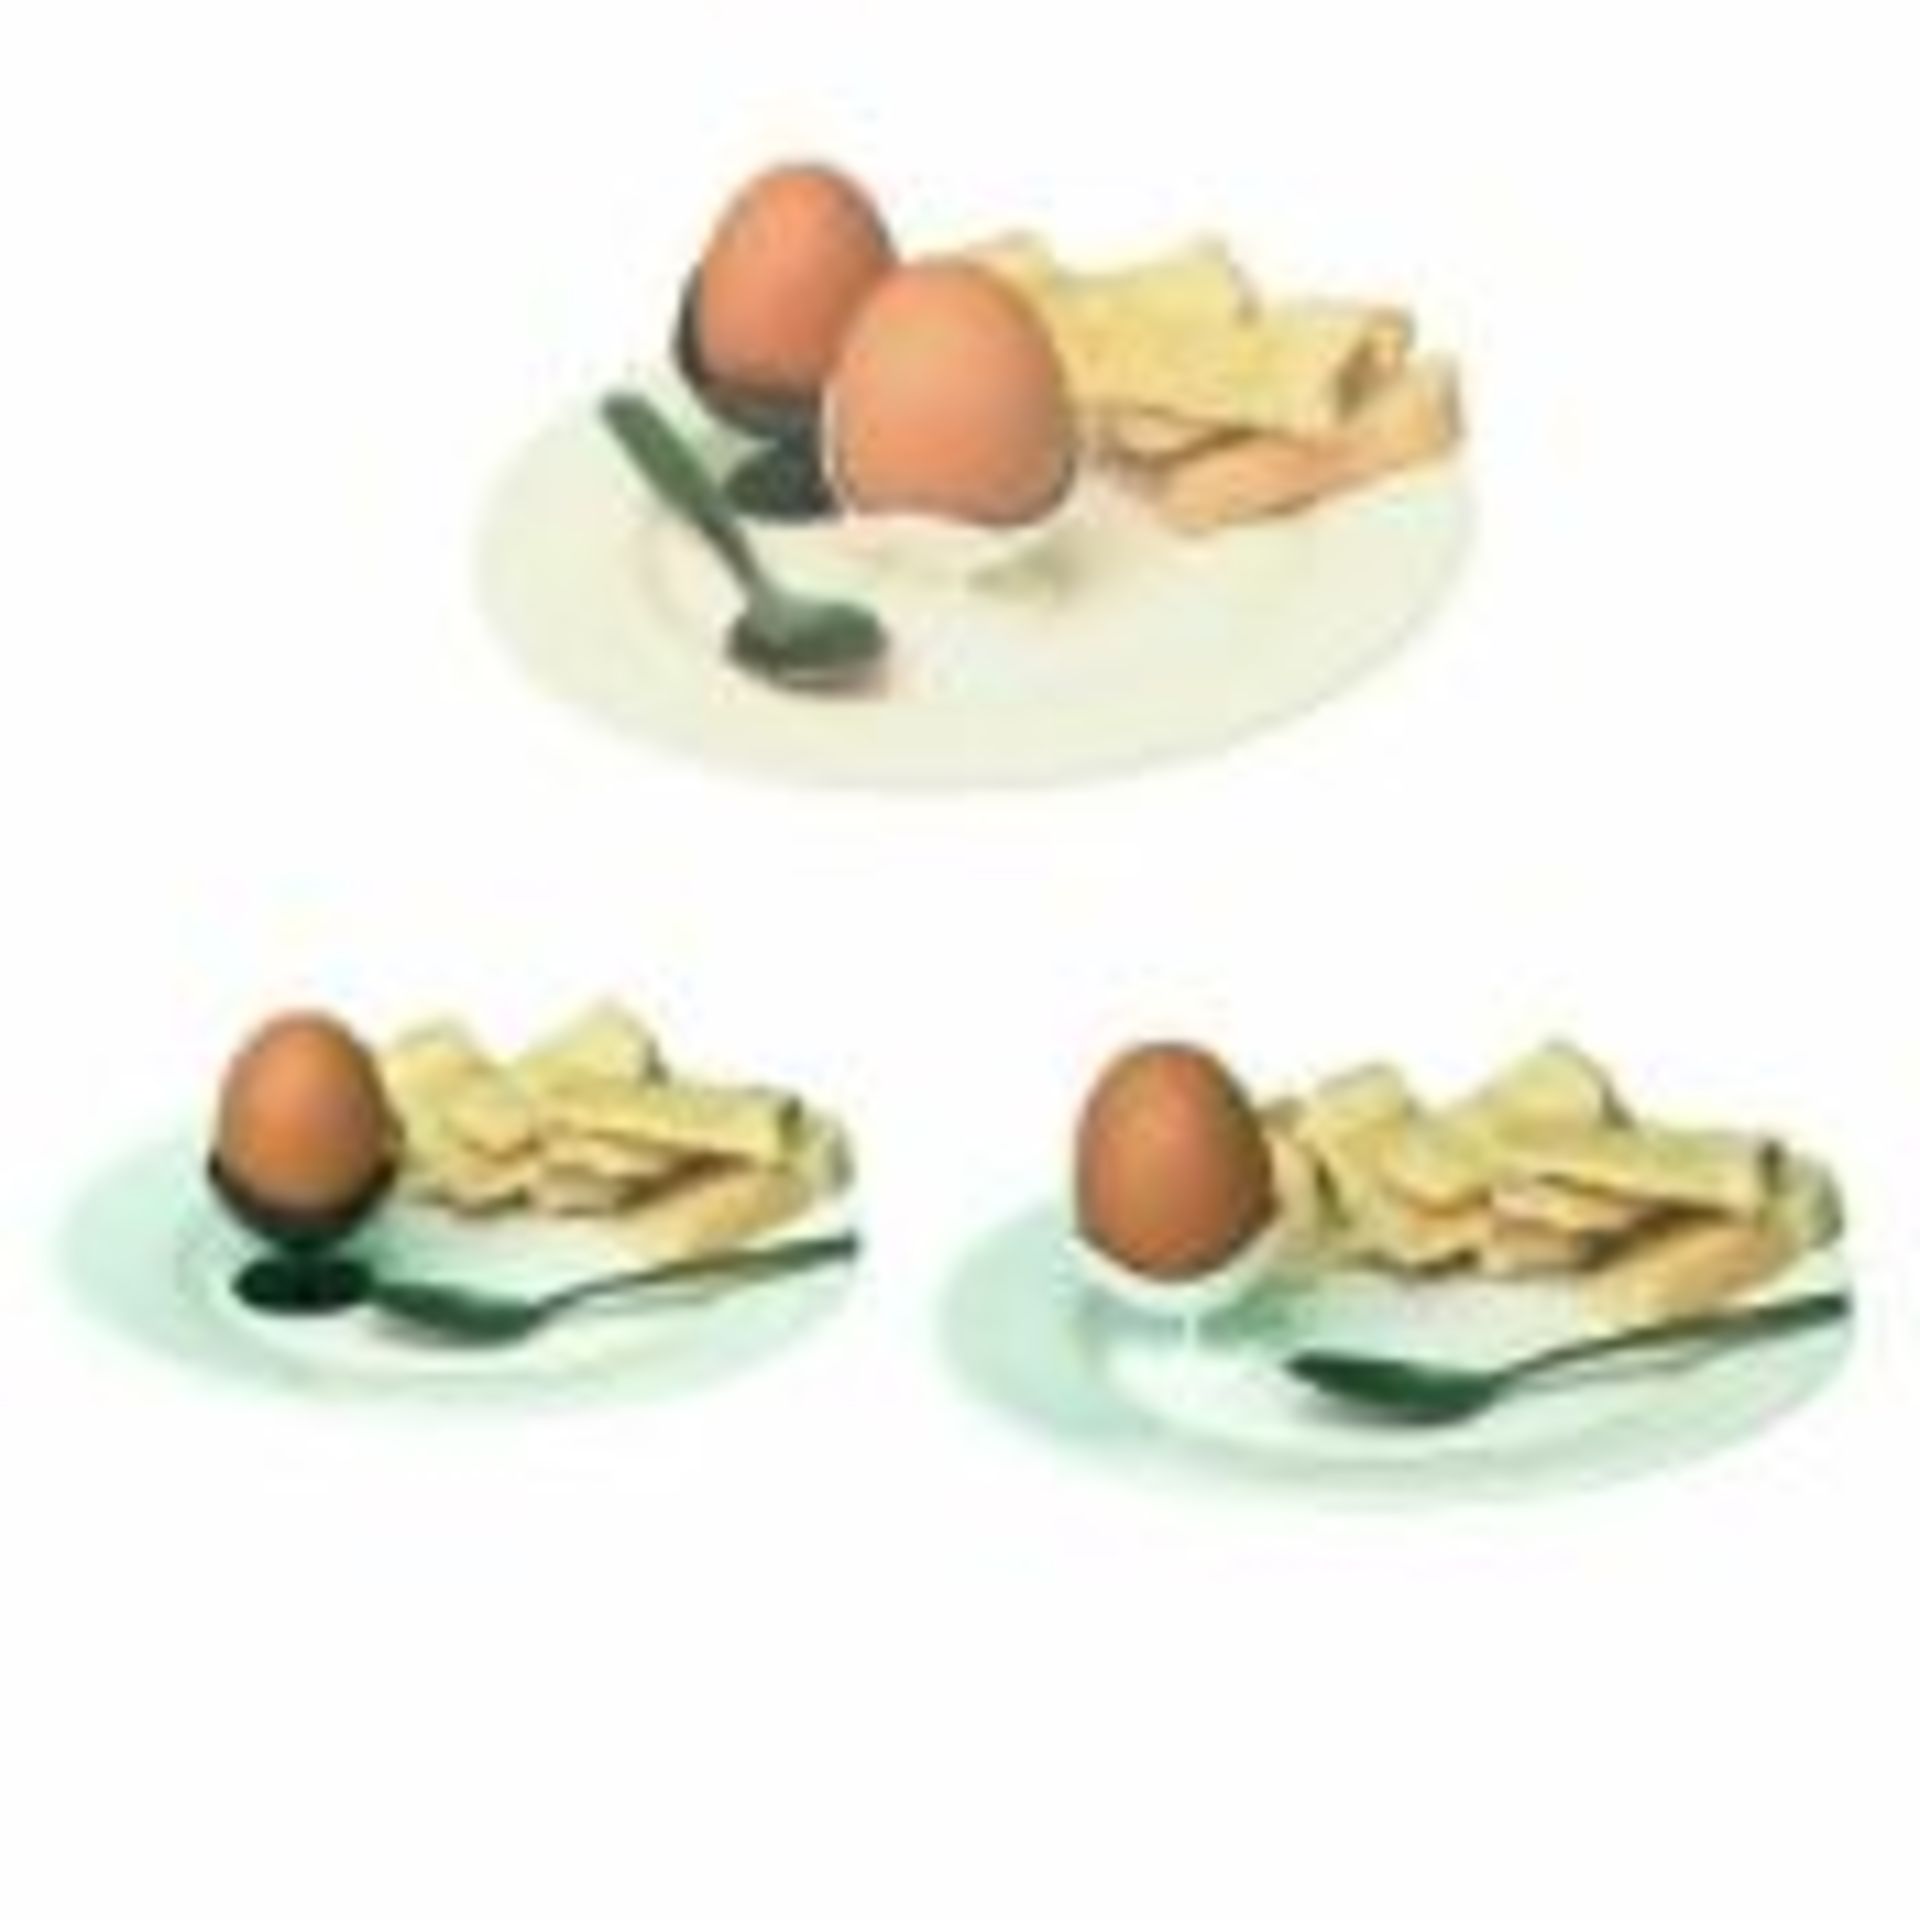 1200 X BRAND NEW COMMERCIAL CATERING EGG CUPS COLOURS MAY VARY - BLACK AND WHITE